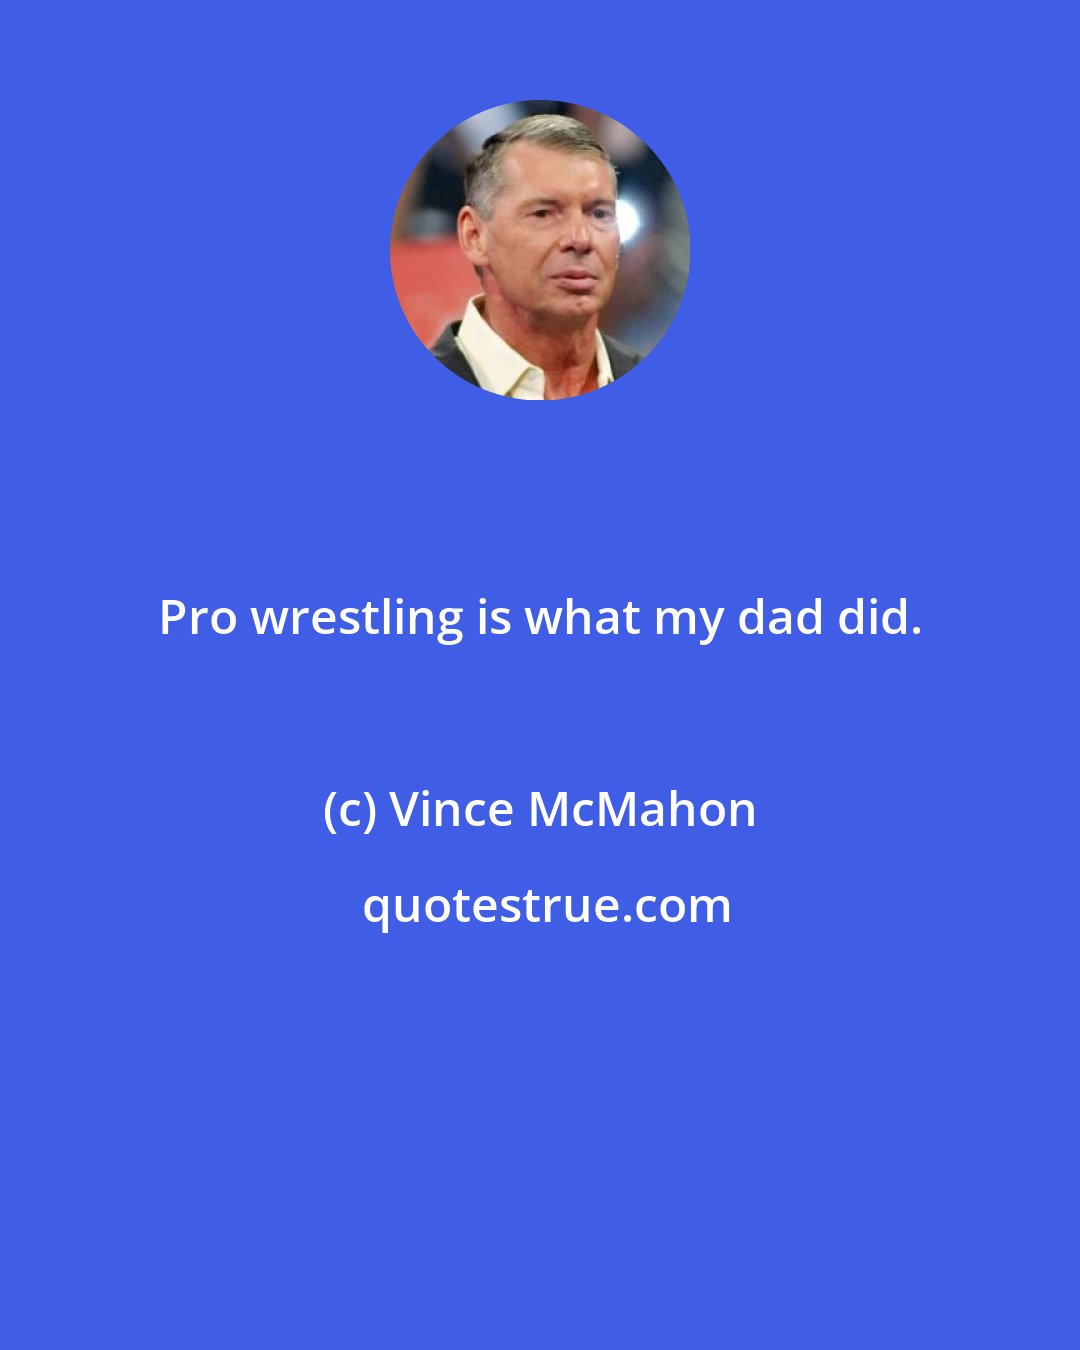 Vince McMahon: Pro wrestling is what my dad did.